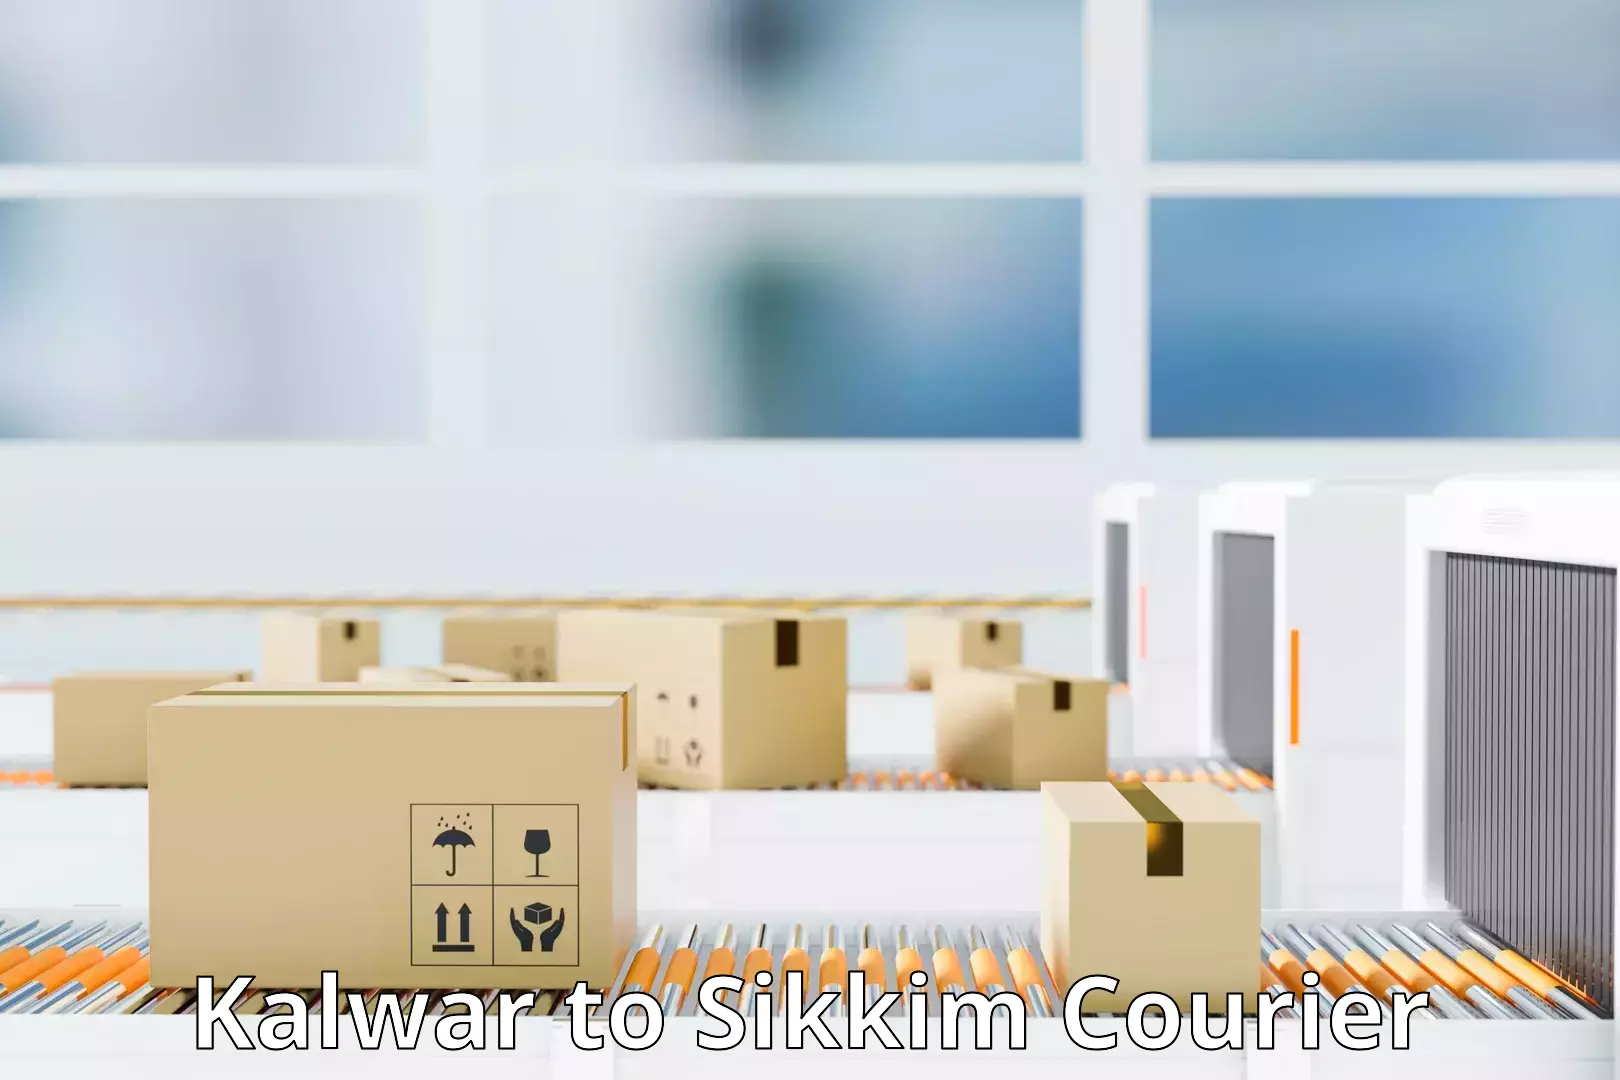 Subscription-based courier Kalwar to Sikkim